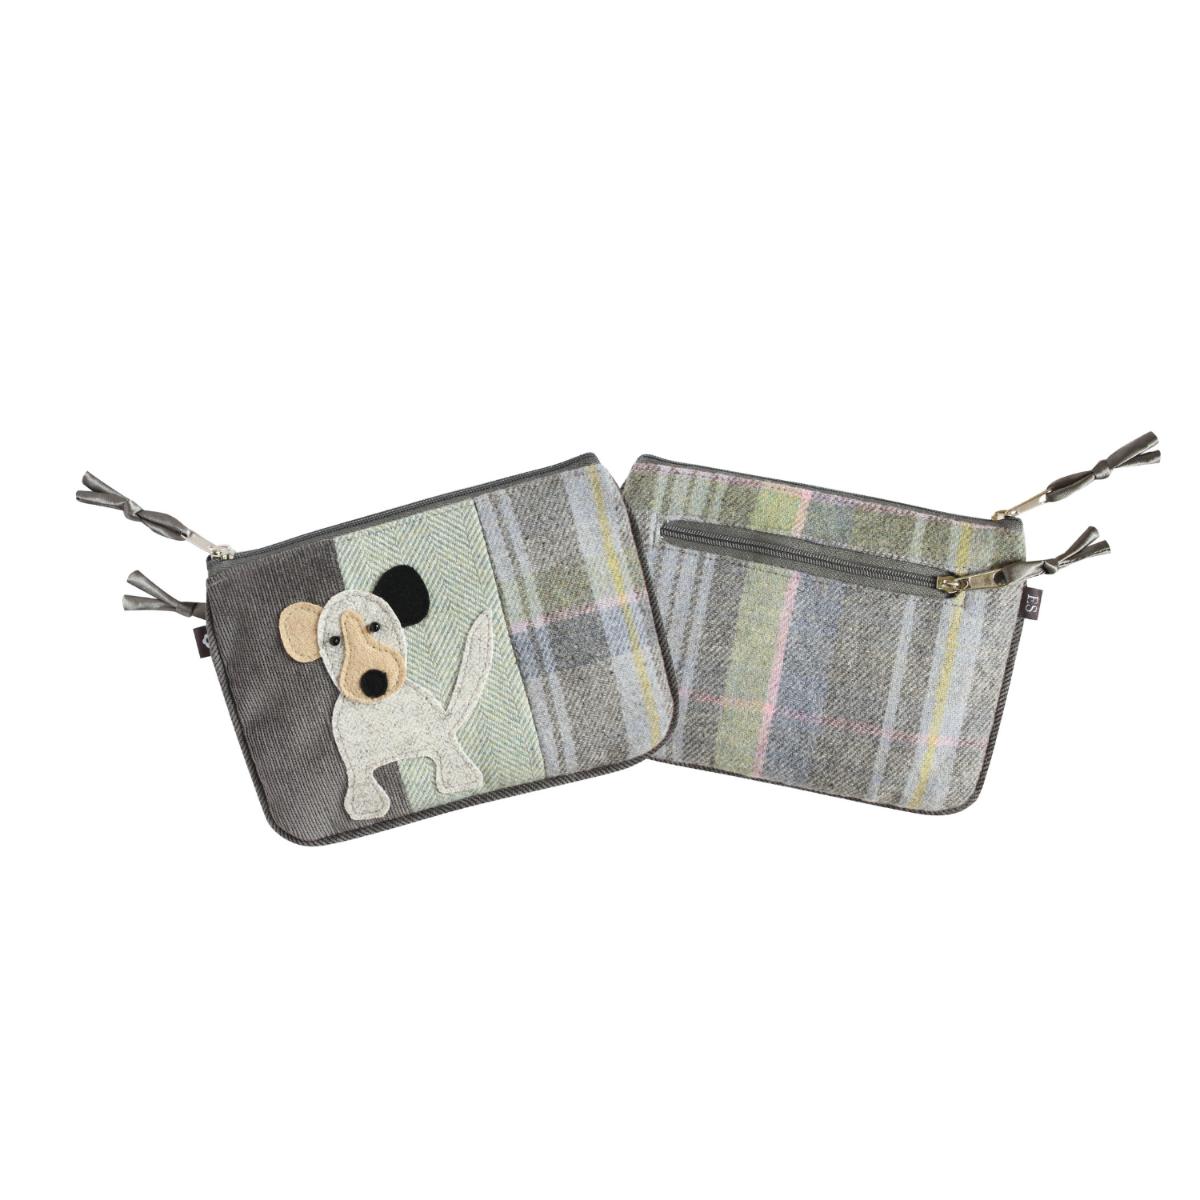 Tweed Juliet Dog Purse by Earth Squared